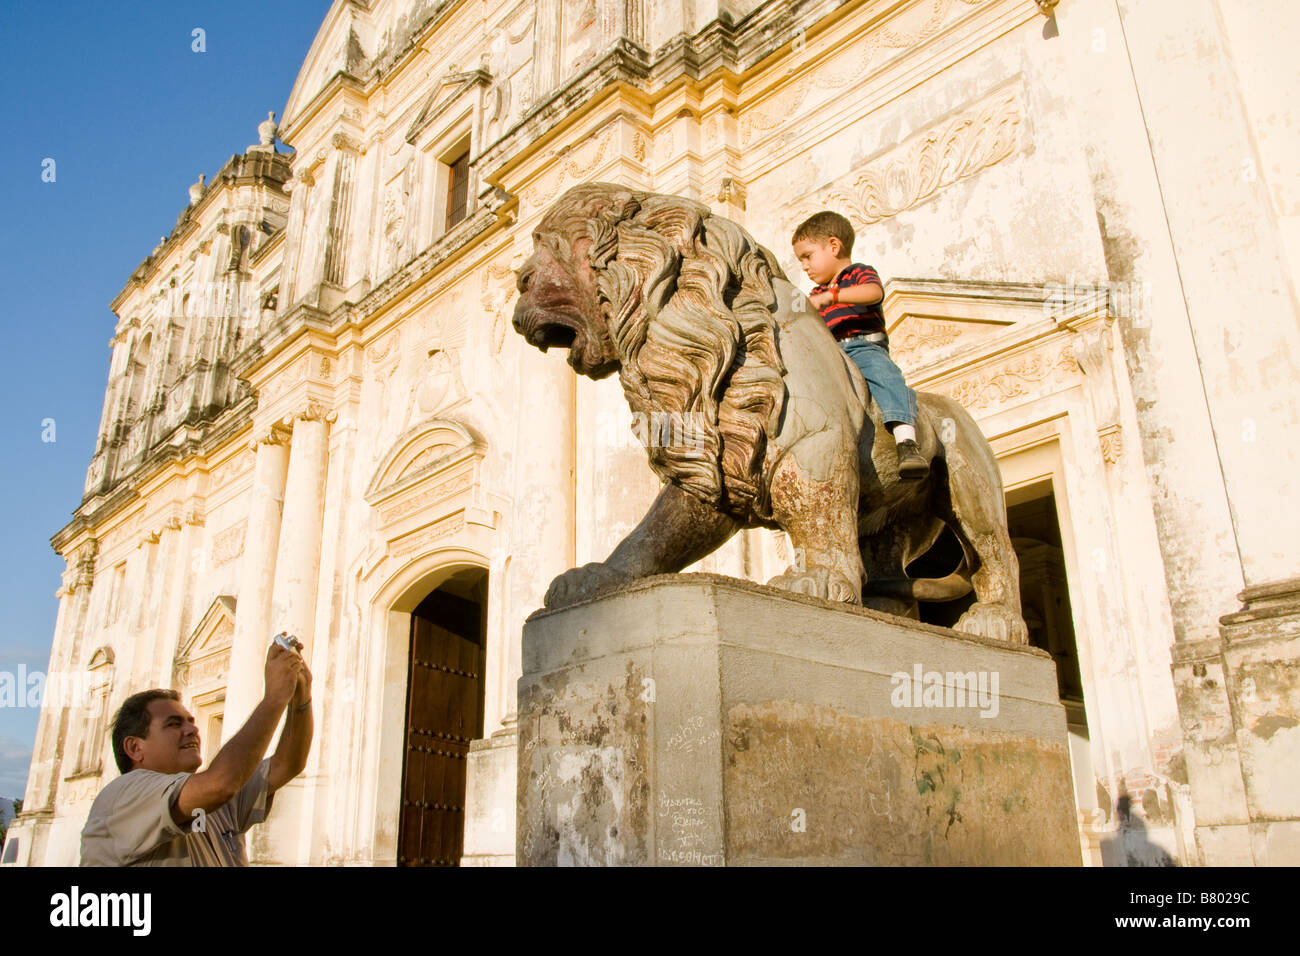 Leon Cathedral, Spanish colonial architecture, with Nicaraguan man photographing boy on lion statue flanking entrance Stock Photo